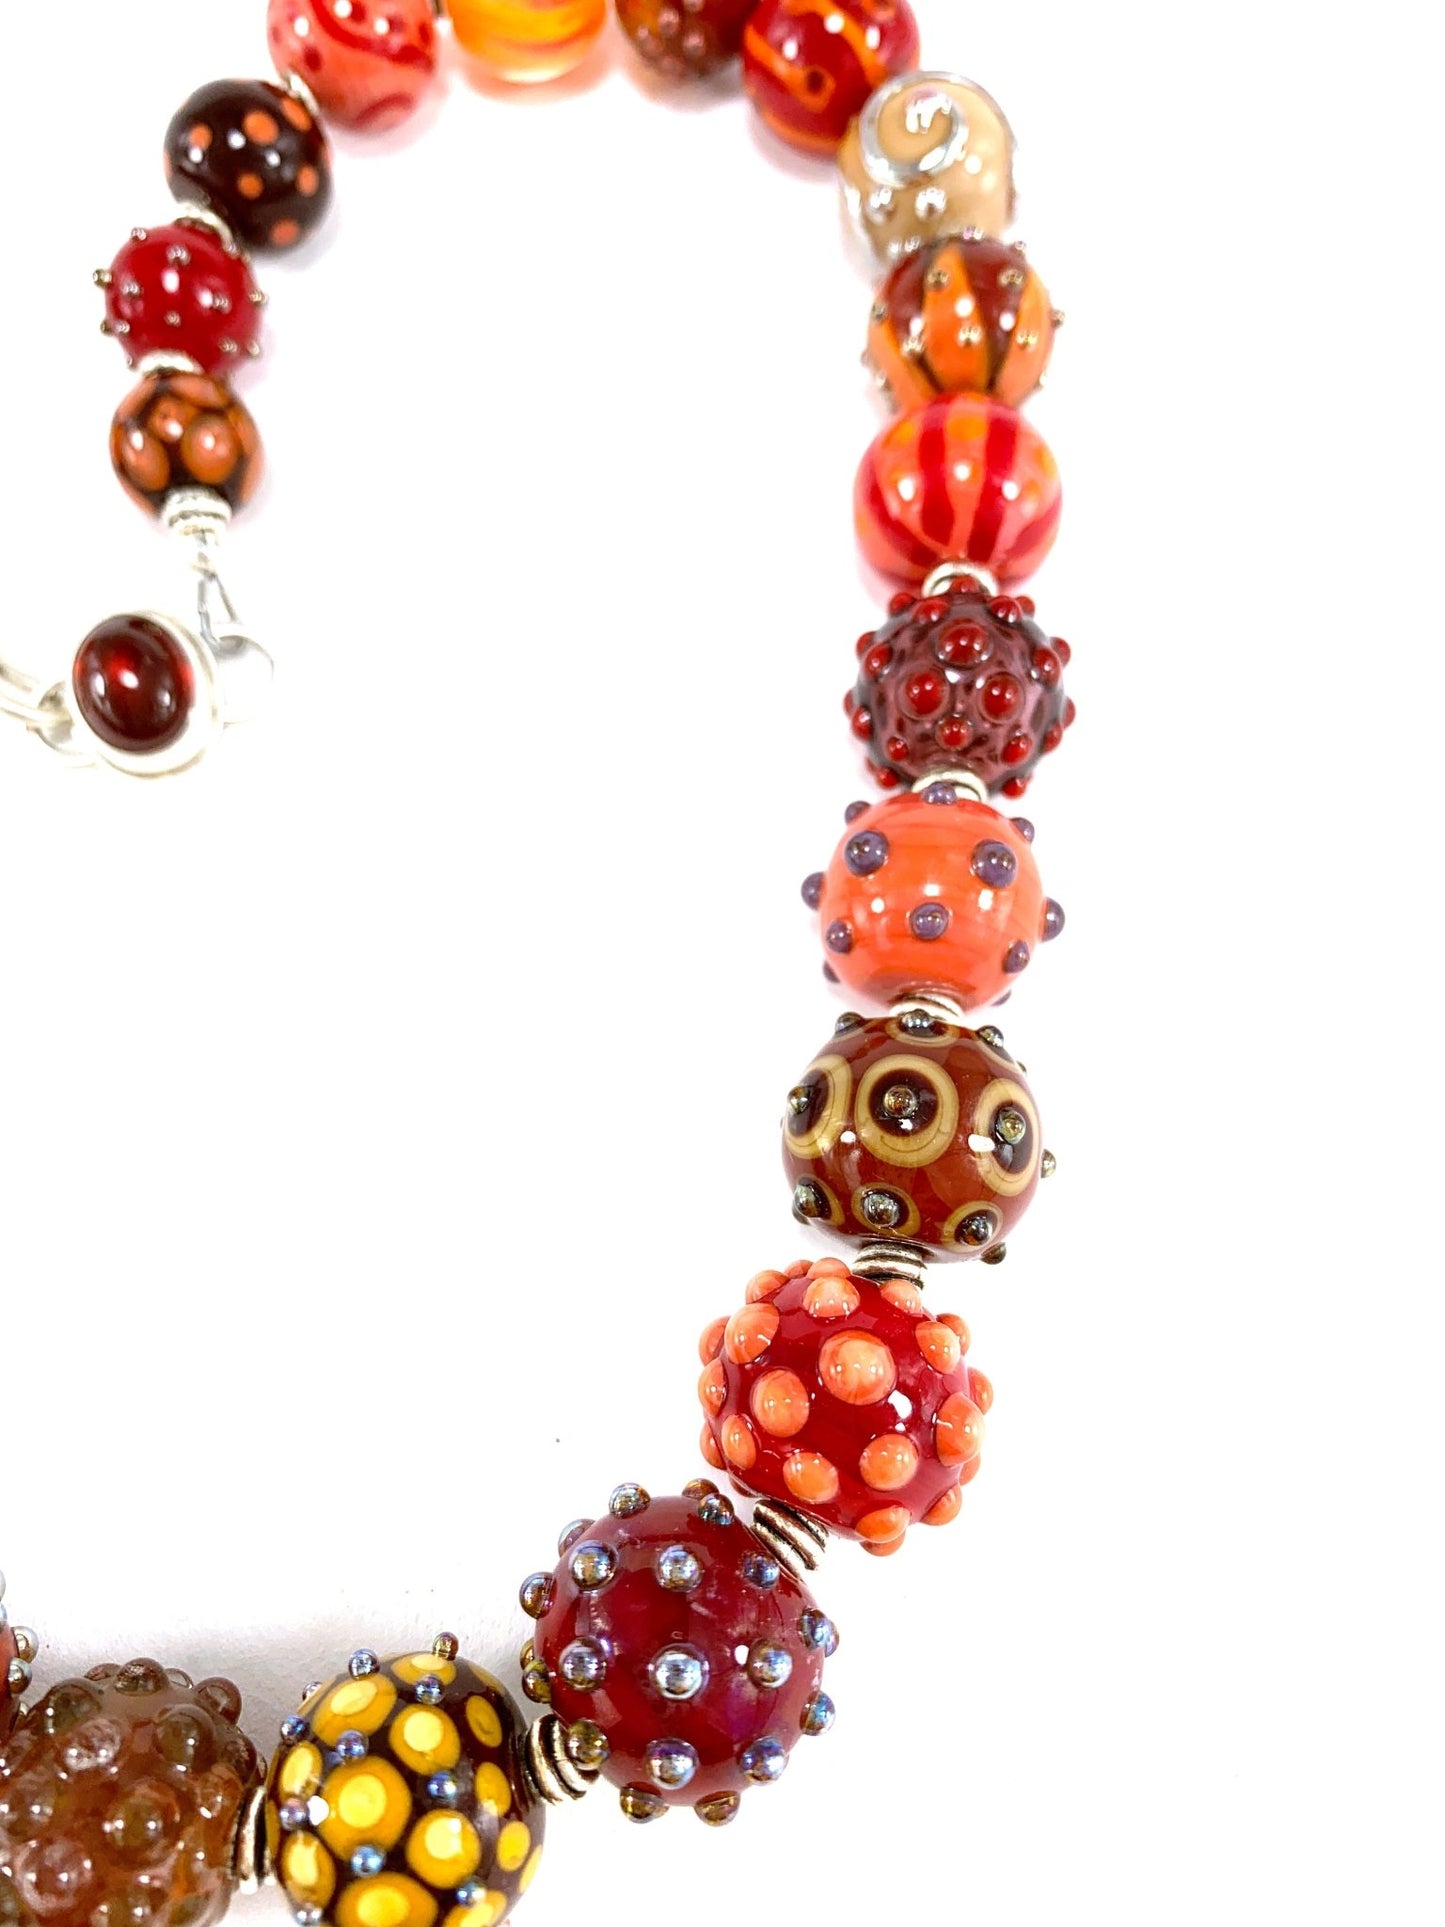 "Summer" Boho Bead Collector's Necklace - The Glass Acorn